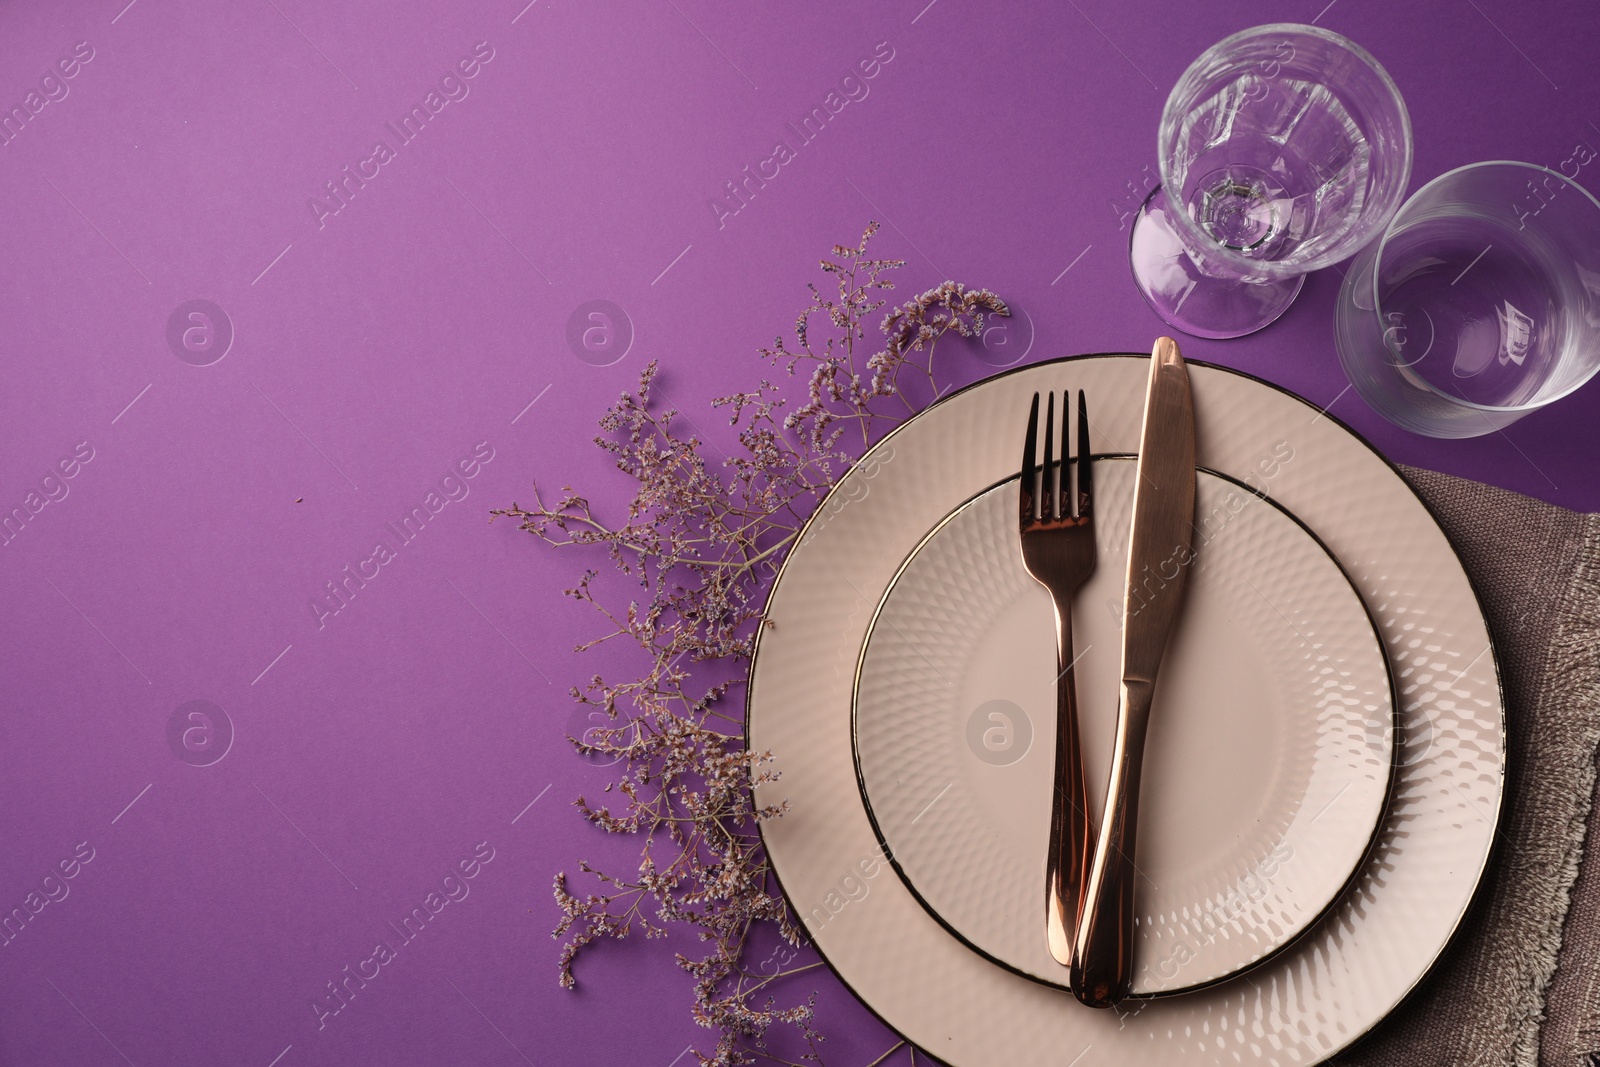 Photo of Stylish table setting. Plates, cutlery, glasses and floral decor on purple background, flat lay with space for text